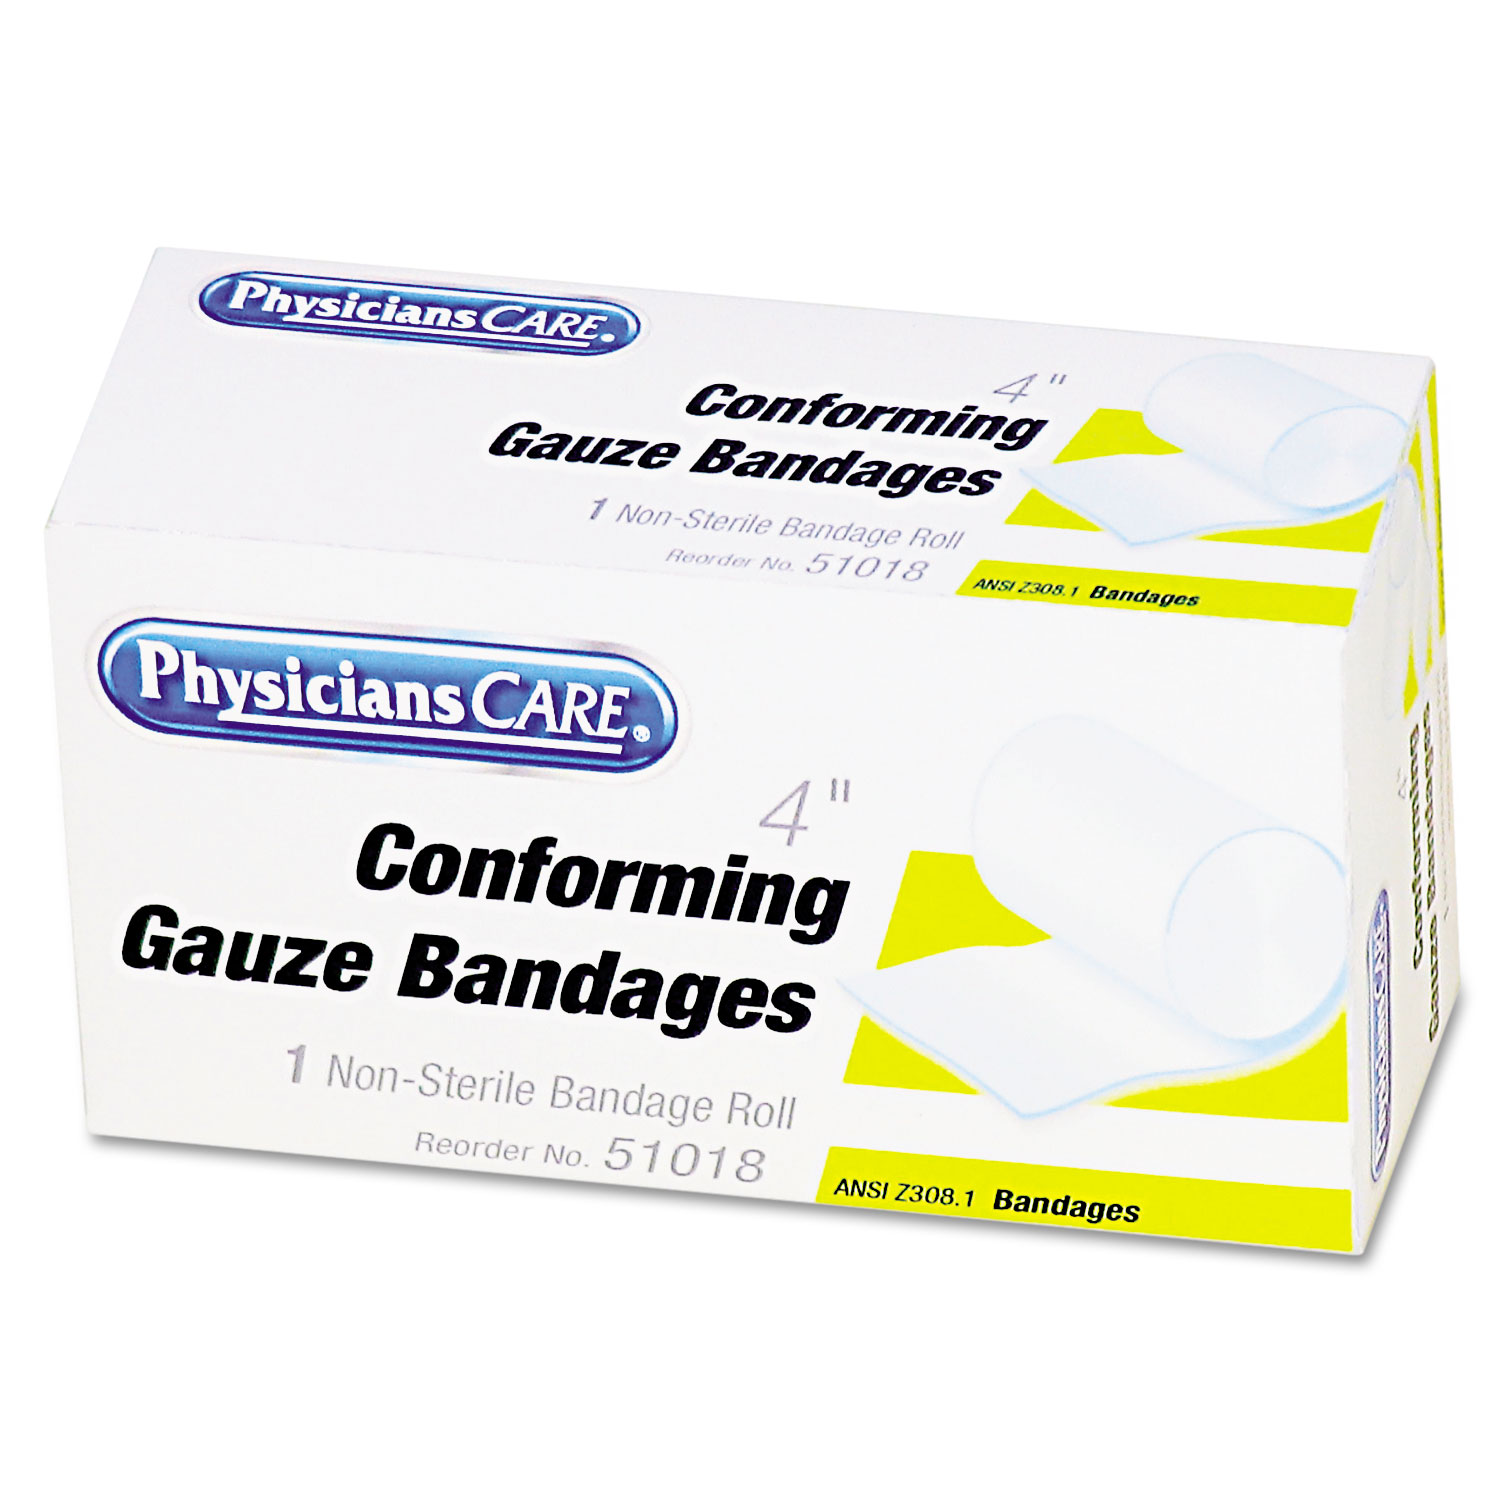 First Aid Conforming Gauze Bandage, 4 wide